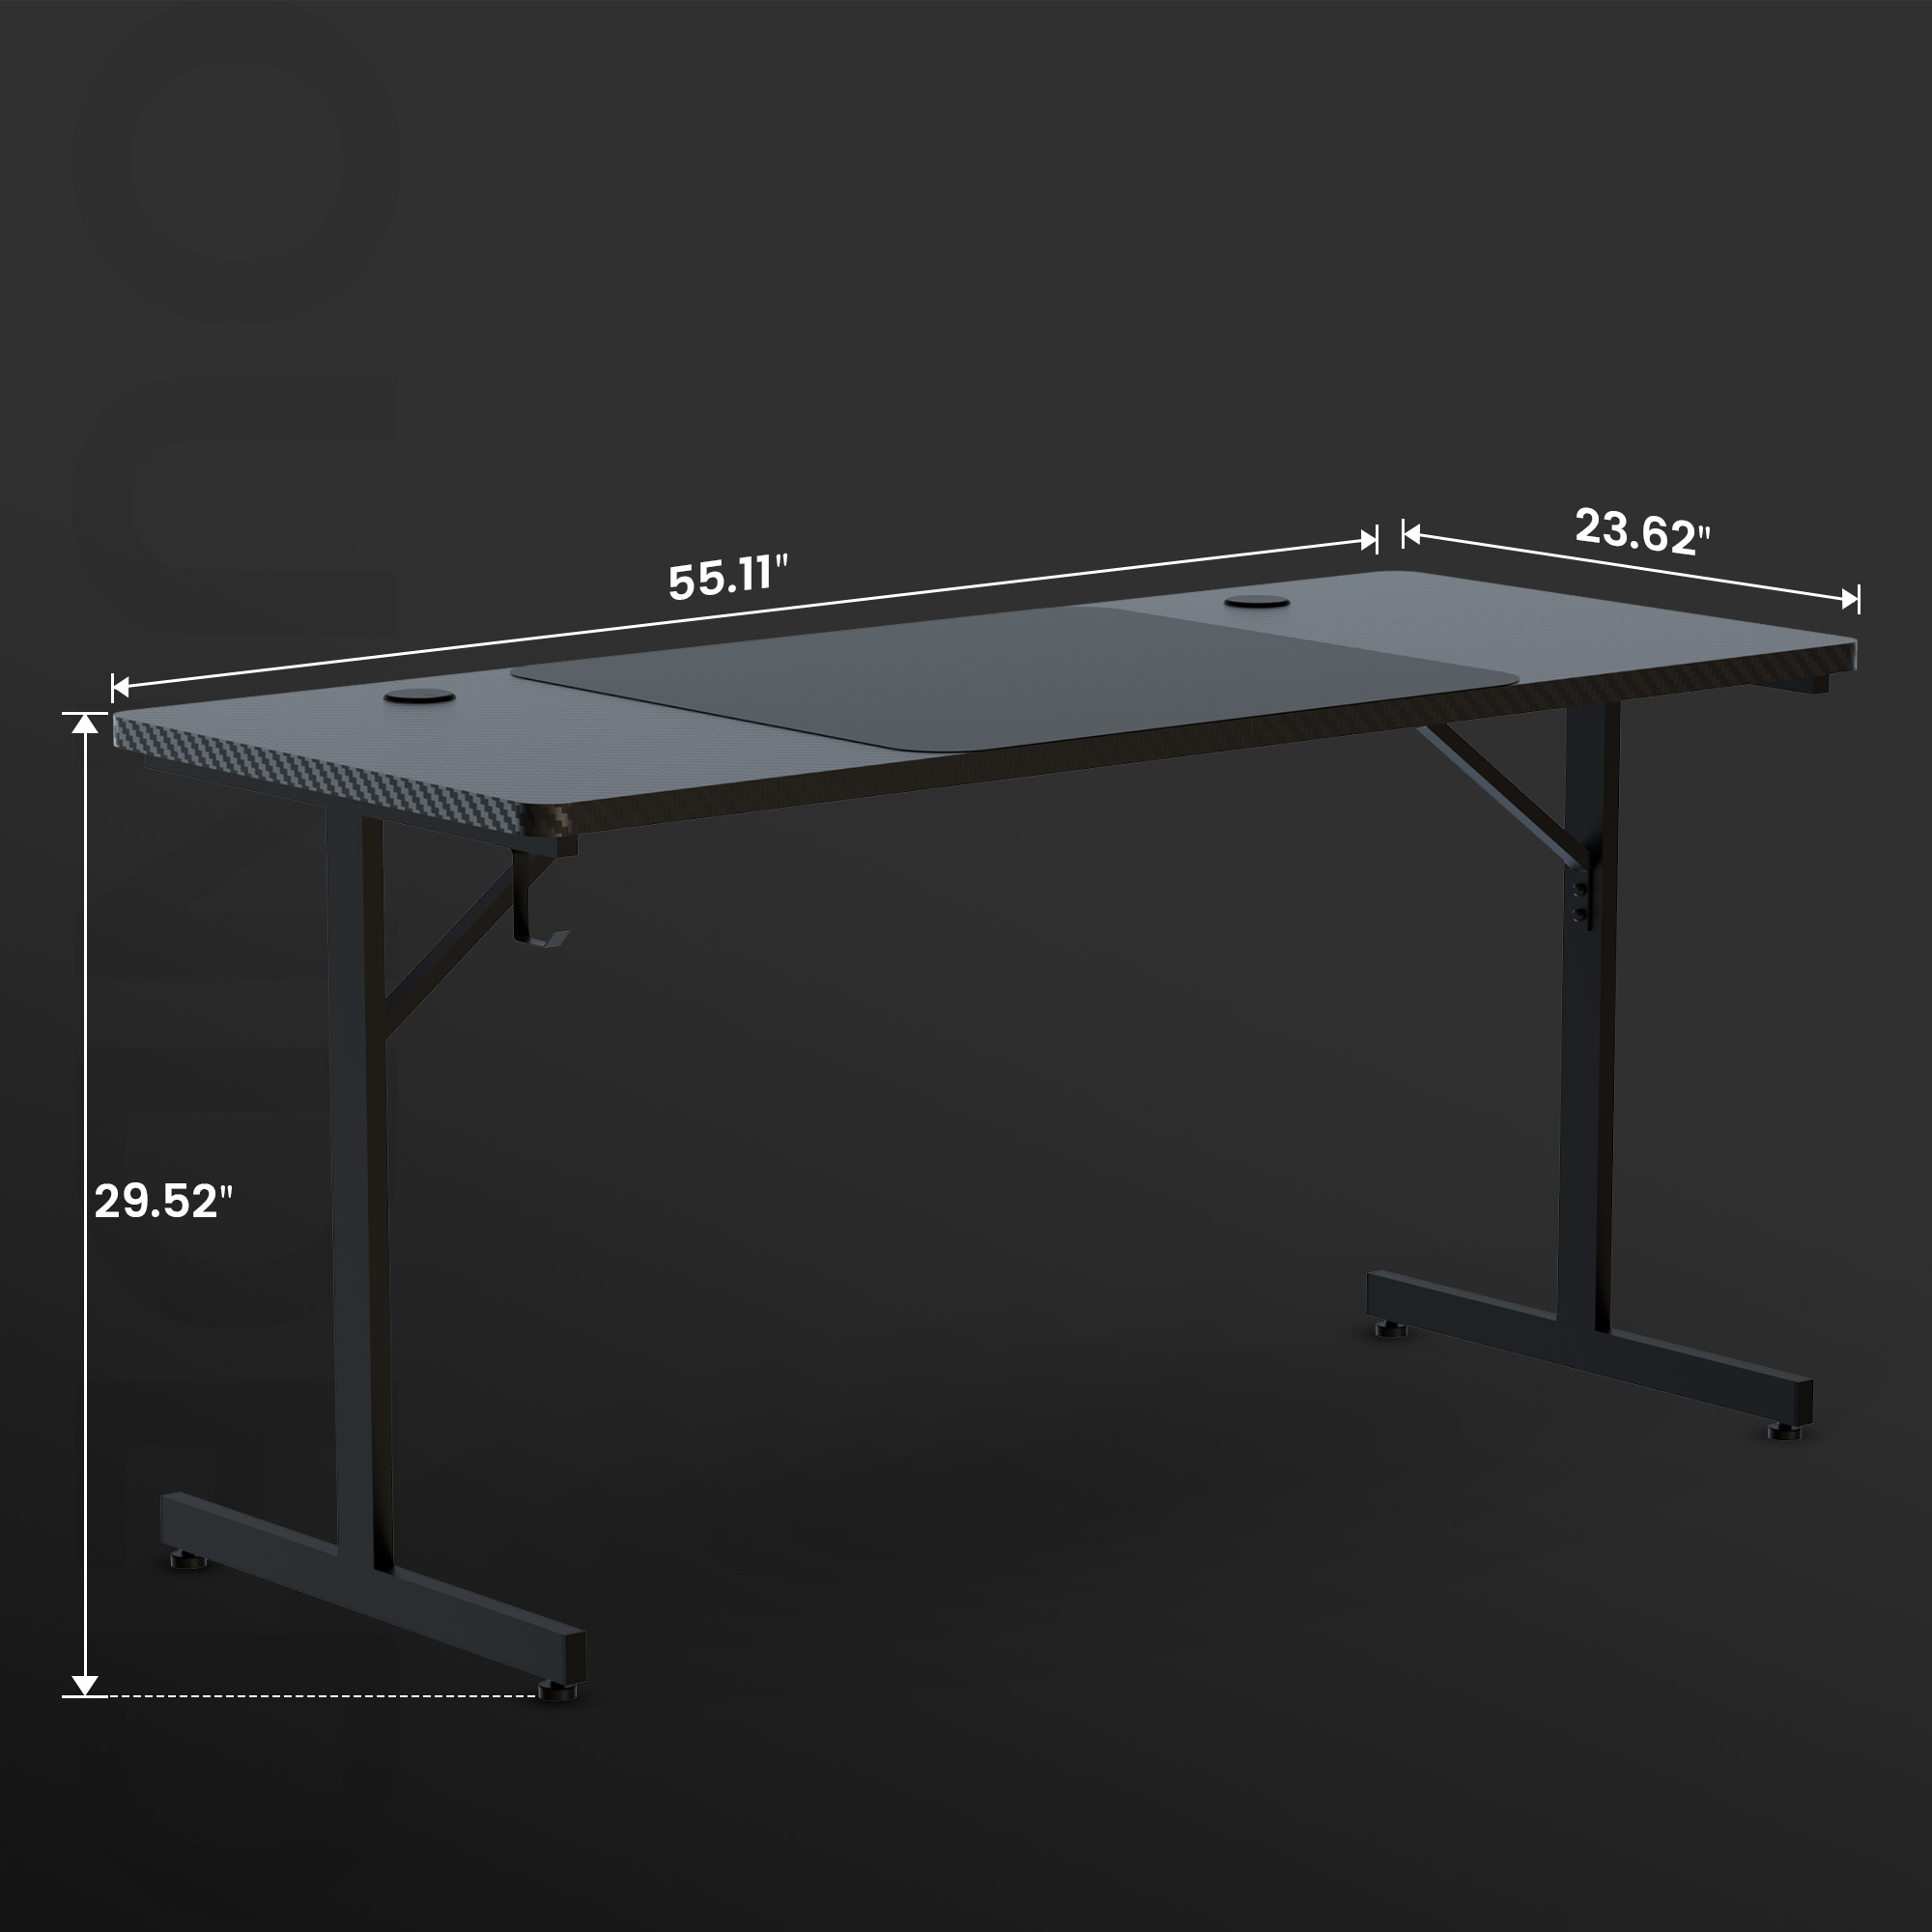 GTRACING 55" Large RGB Gaming Desk with Mouse Pad T-Shaped Office Desk Spacious Work Surface Table, Black - image 3 of 10